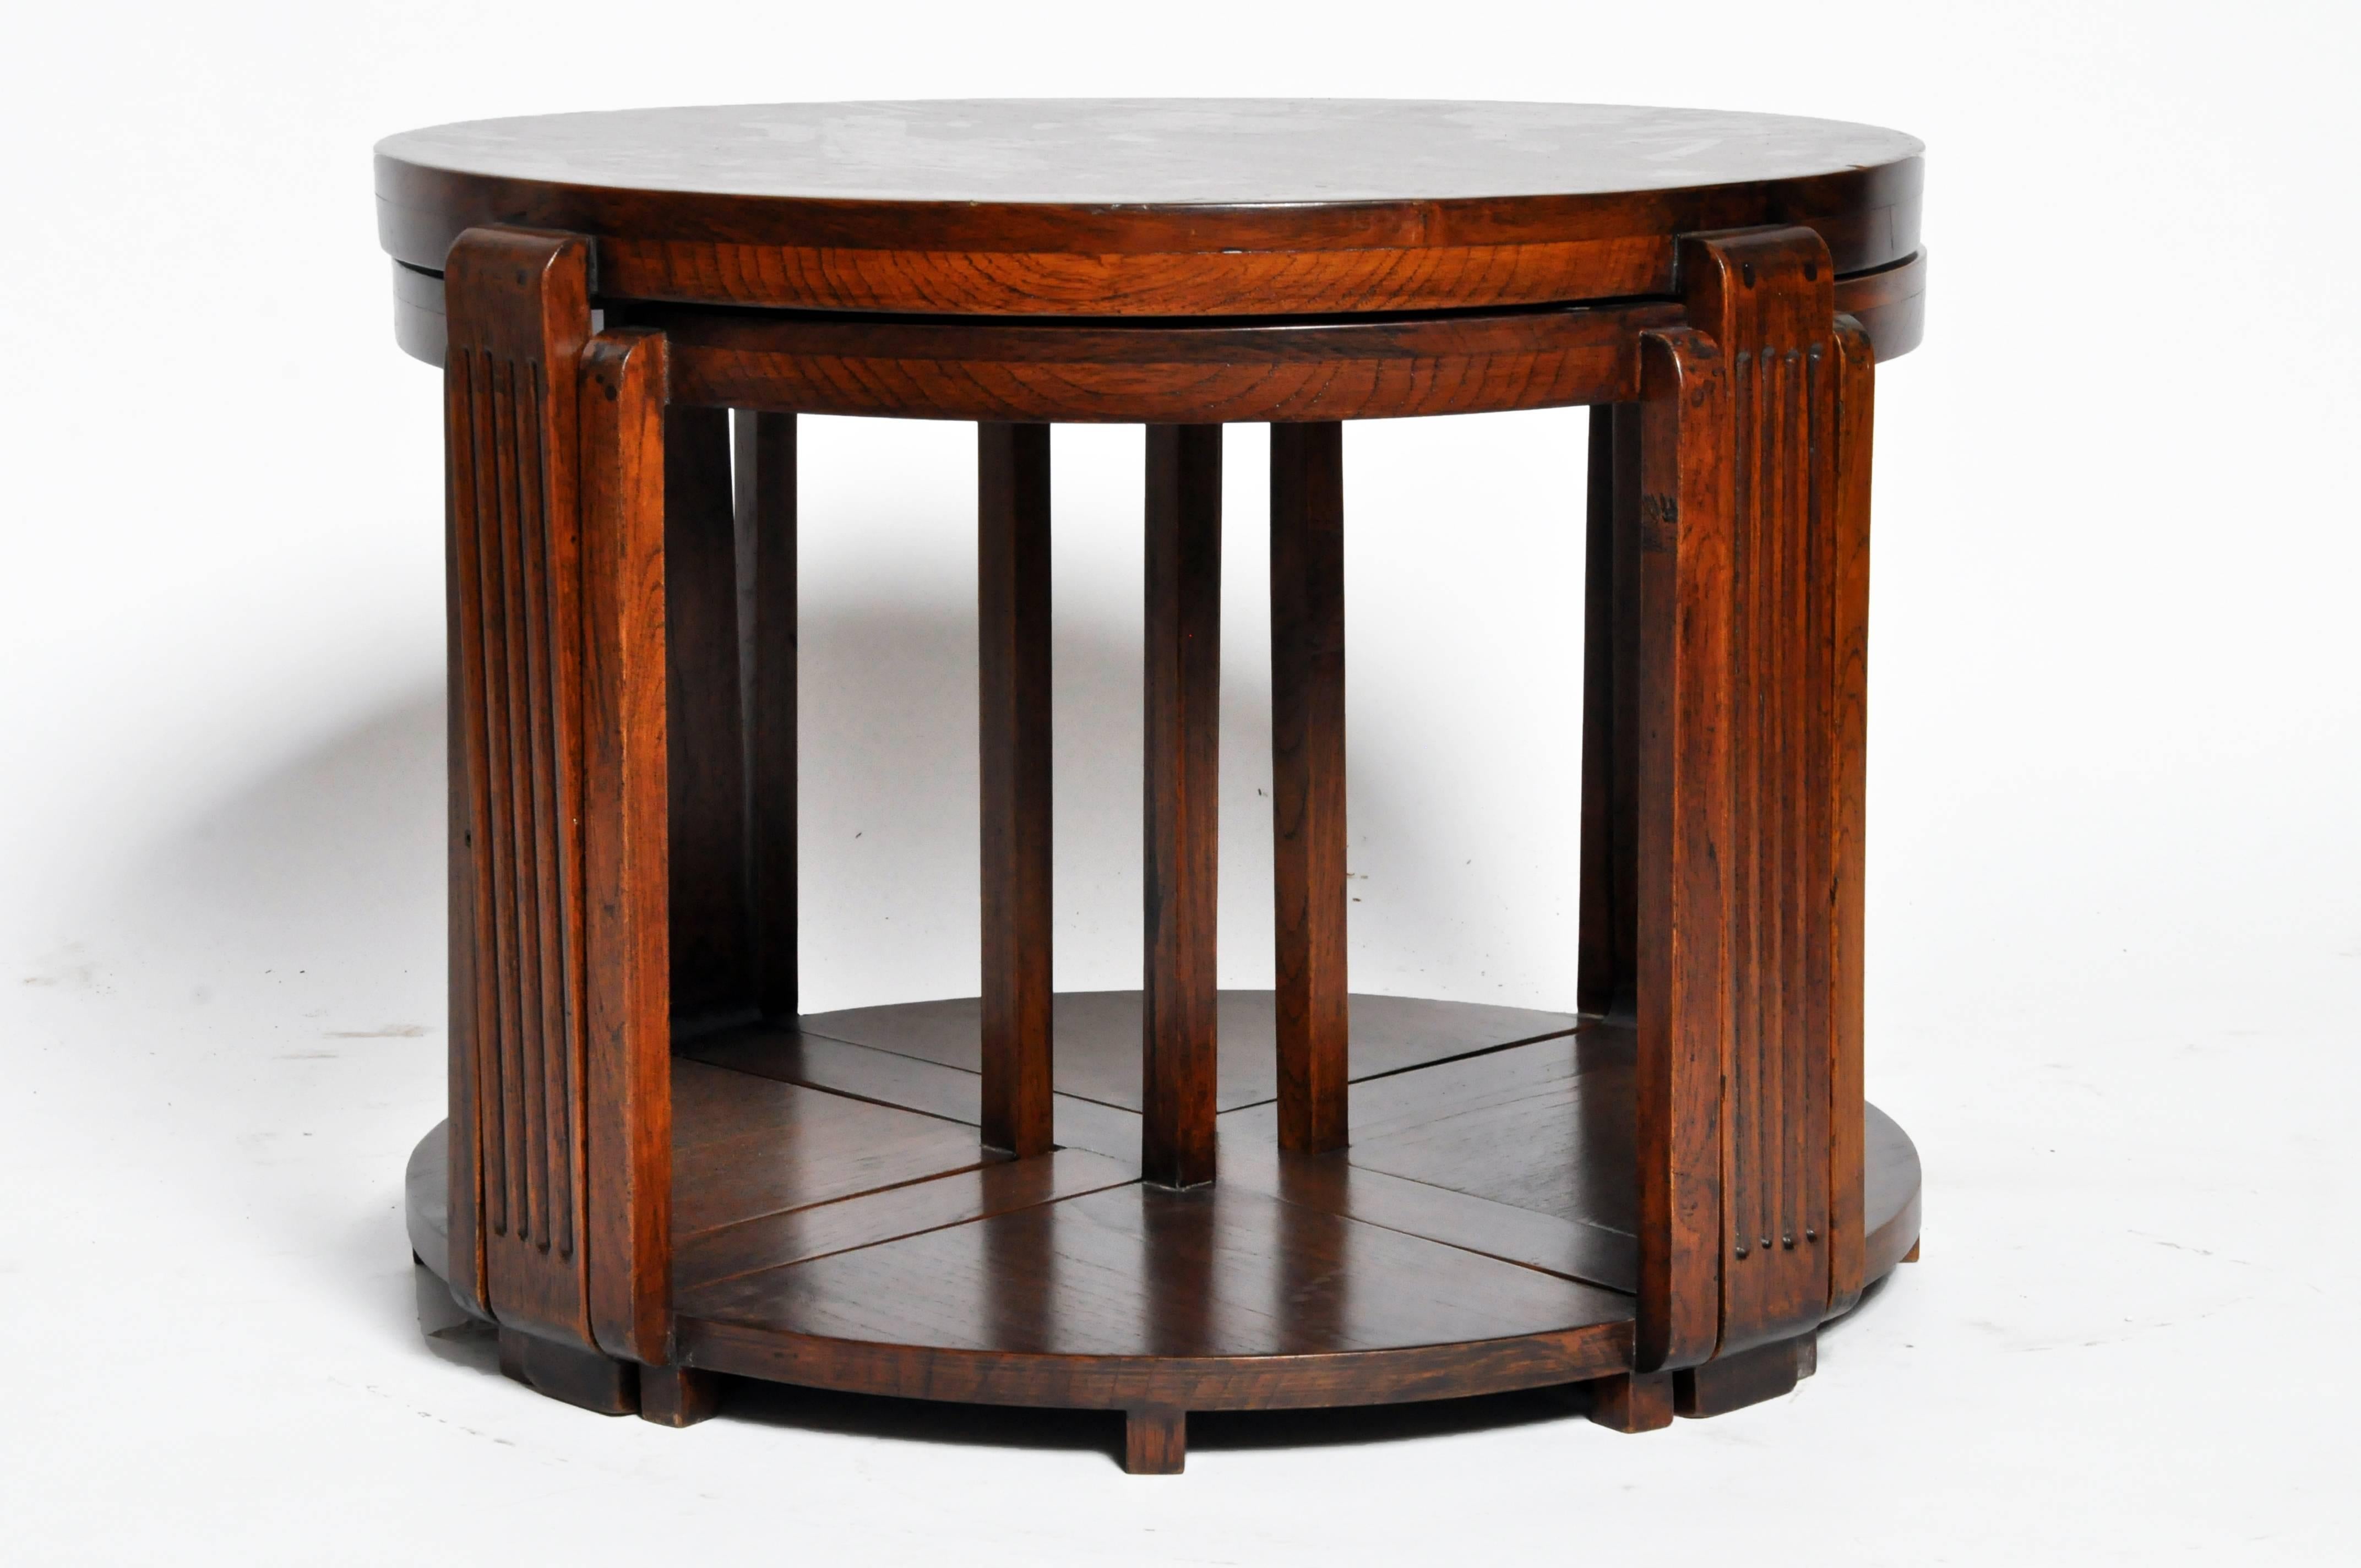 This impressive British Colonial round table is from Rangoon, Burma and is made from teak wood. The veranda center table features four small nested side tables that can be used as seats for the table and has its original finish.